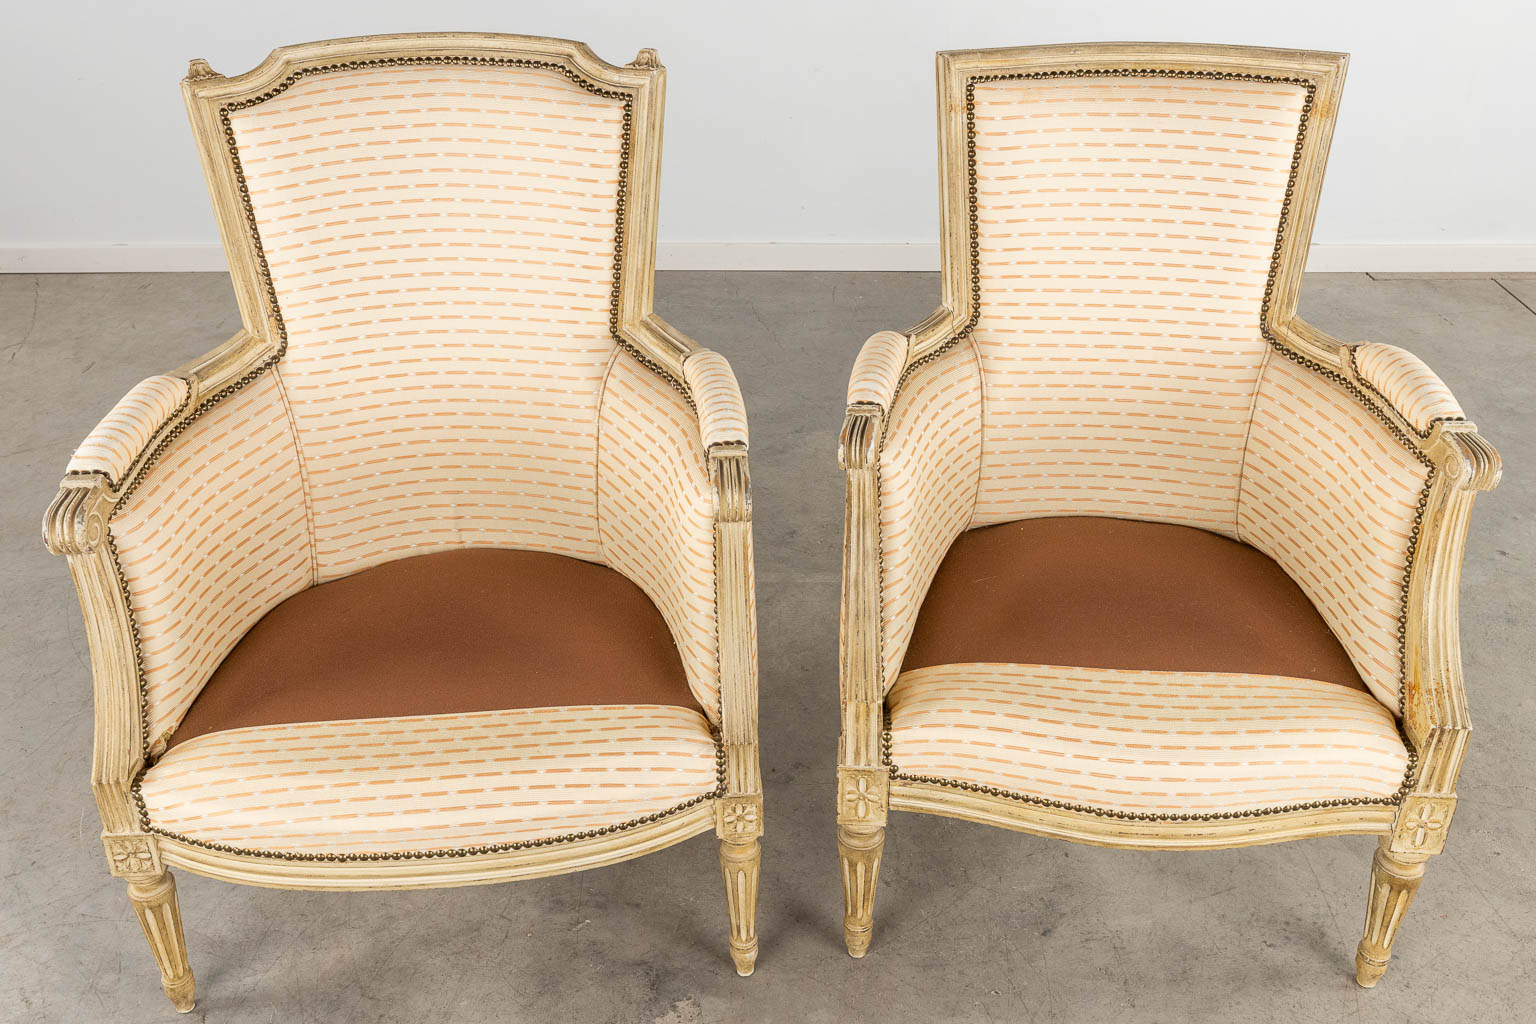 A pair of armchairs, sculptured wood with fabric in Louis XVI style. (D:64 x W:66 x H:92 cm)